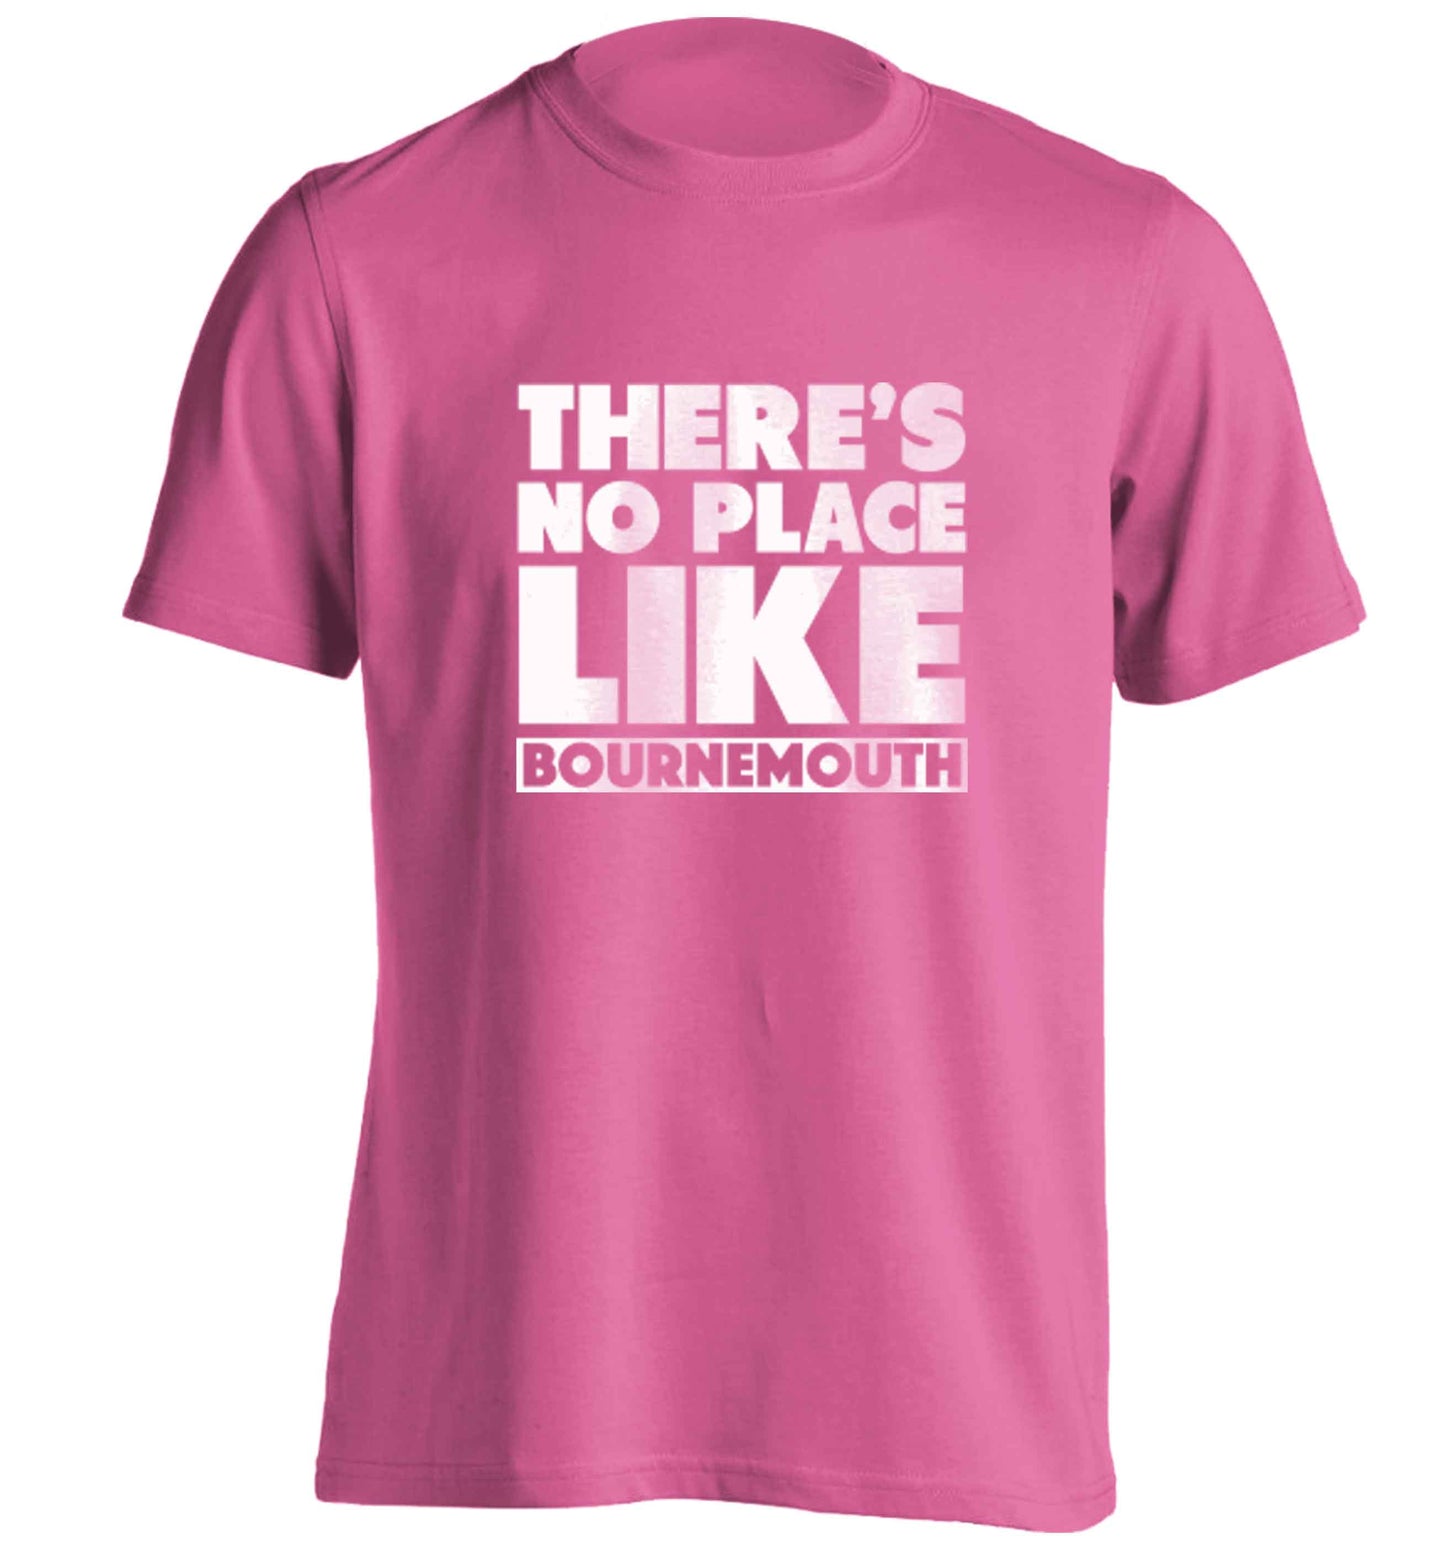 There's no place like Bournemouth adults unisex pink Tshirt 2XL